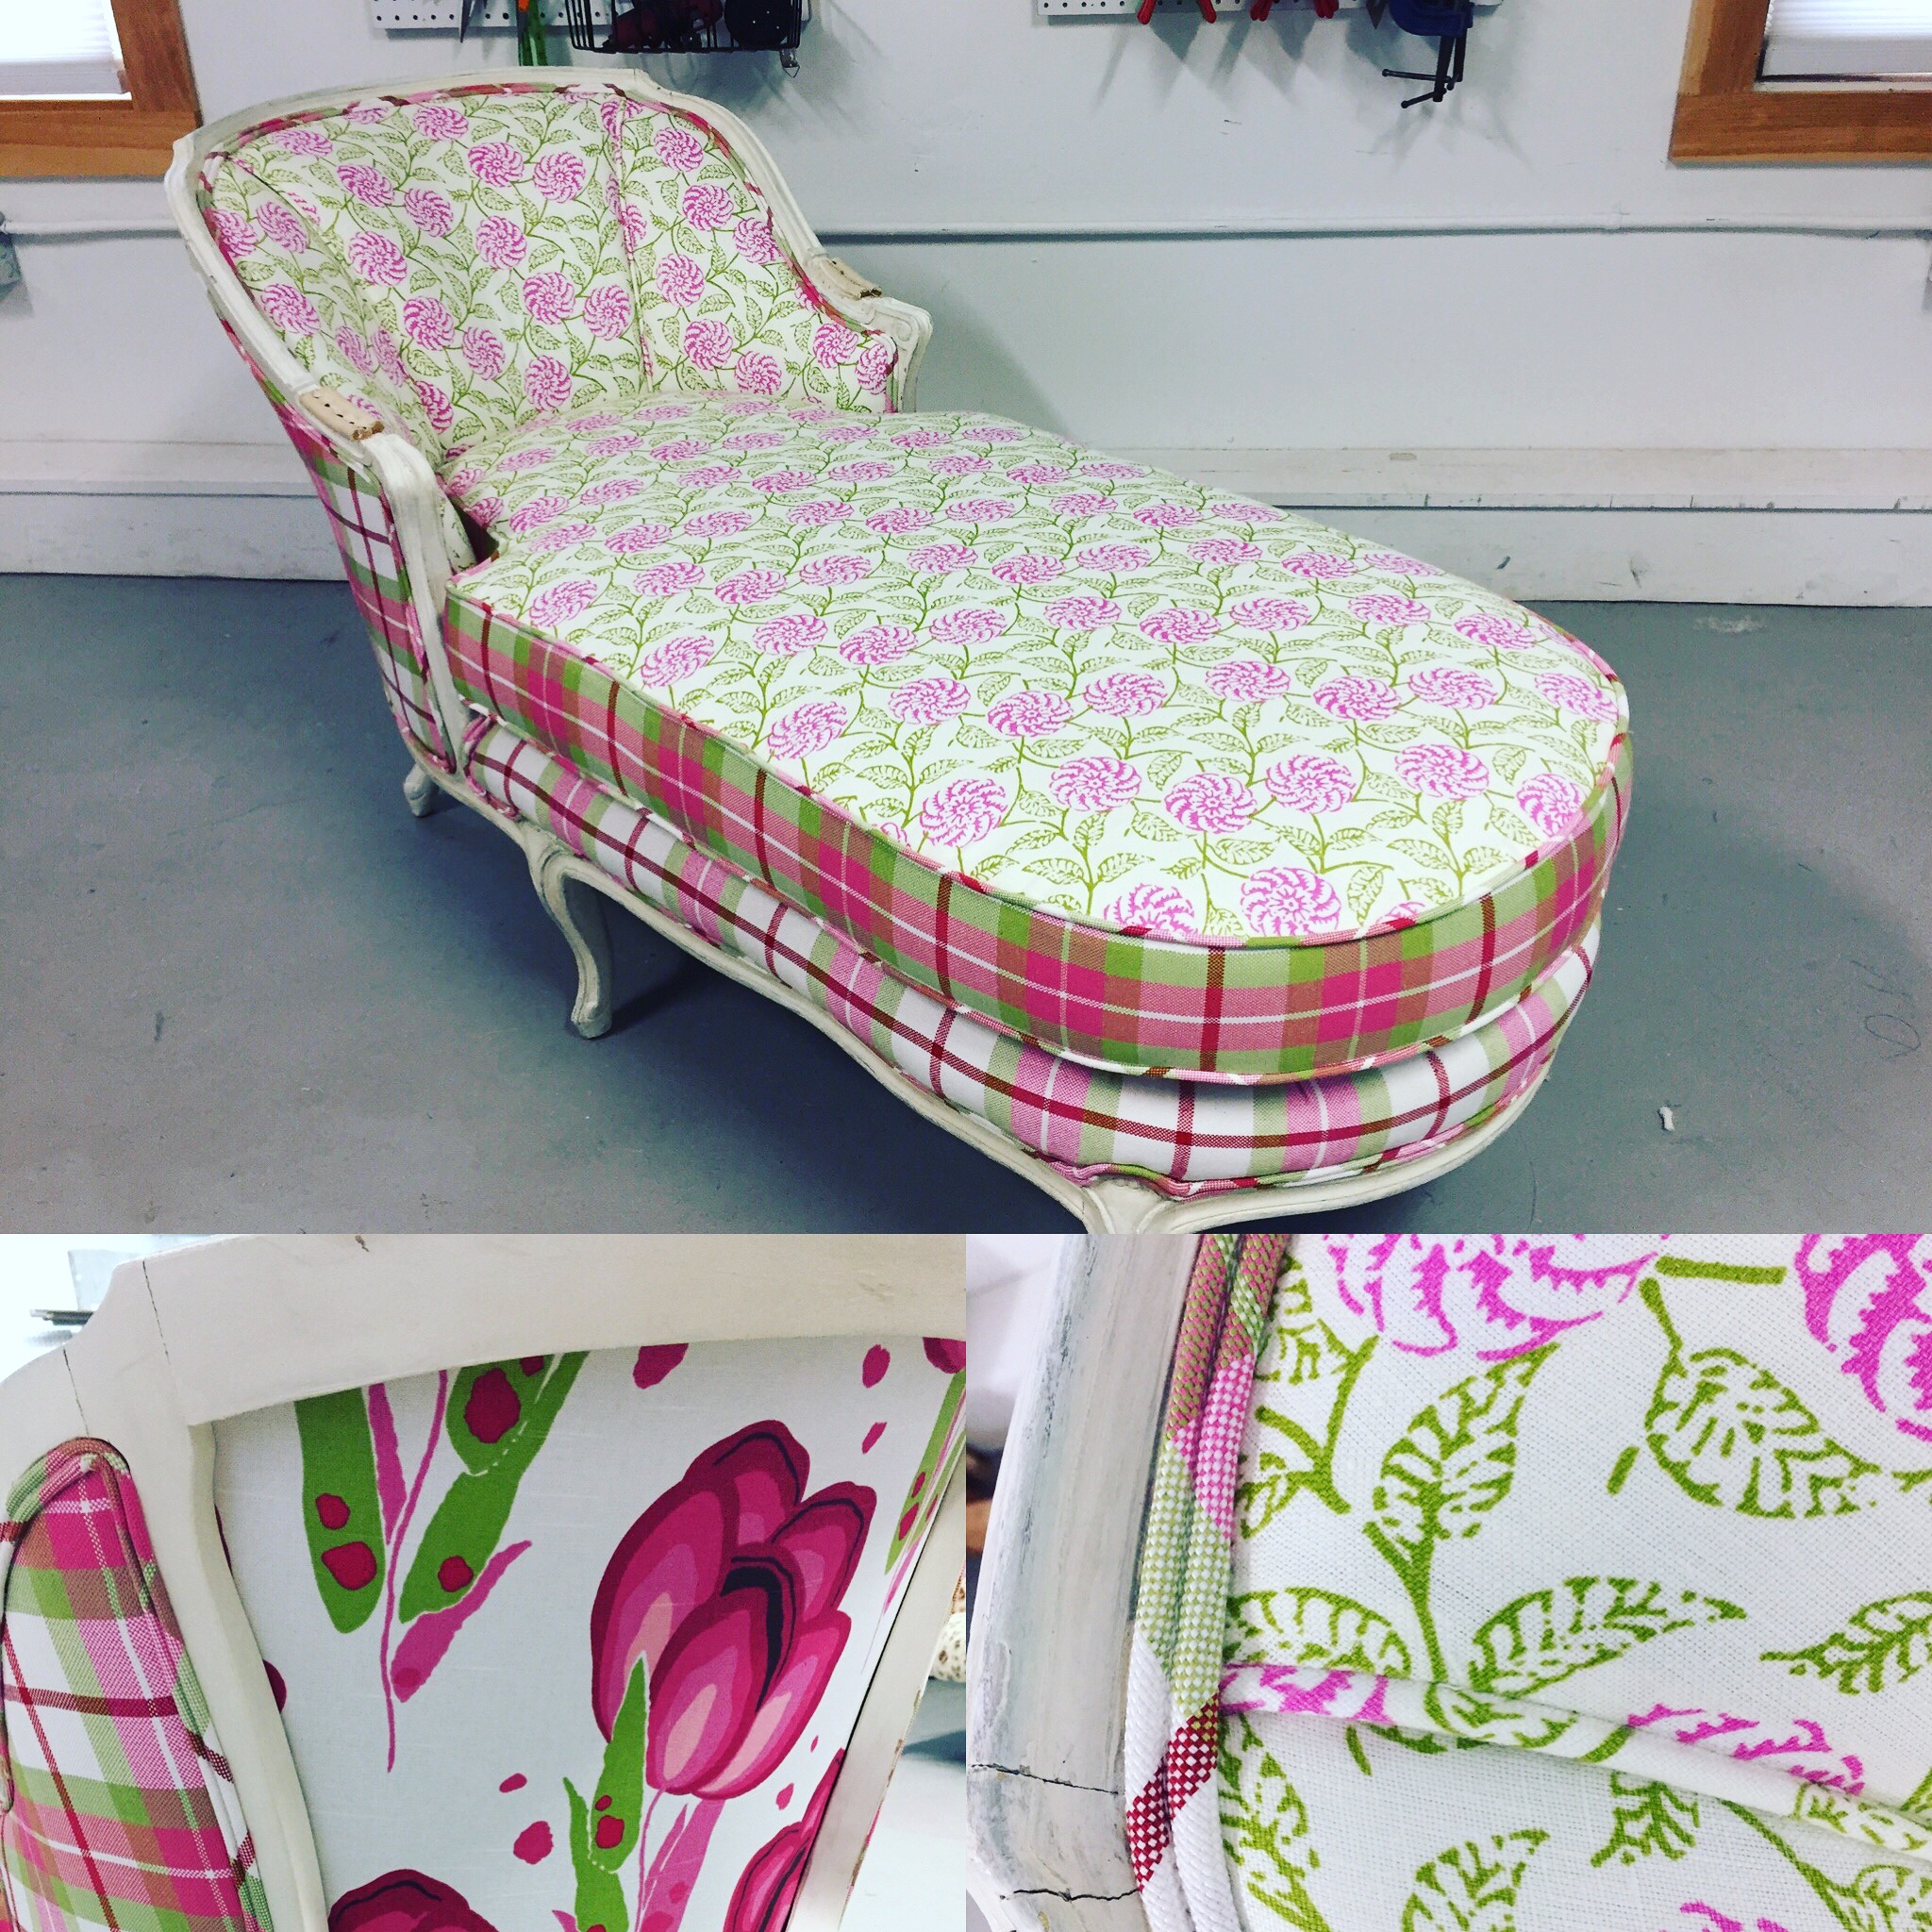 Upholstering a French Provincial Chaise